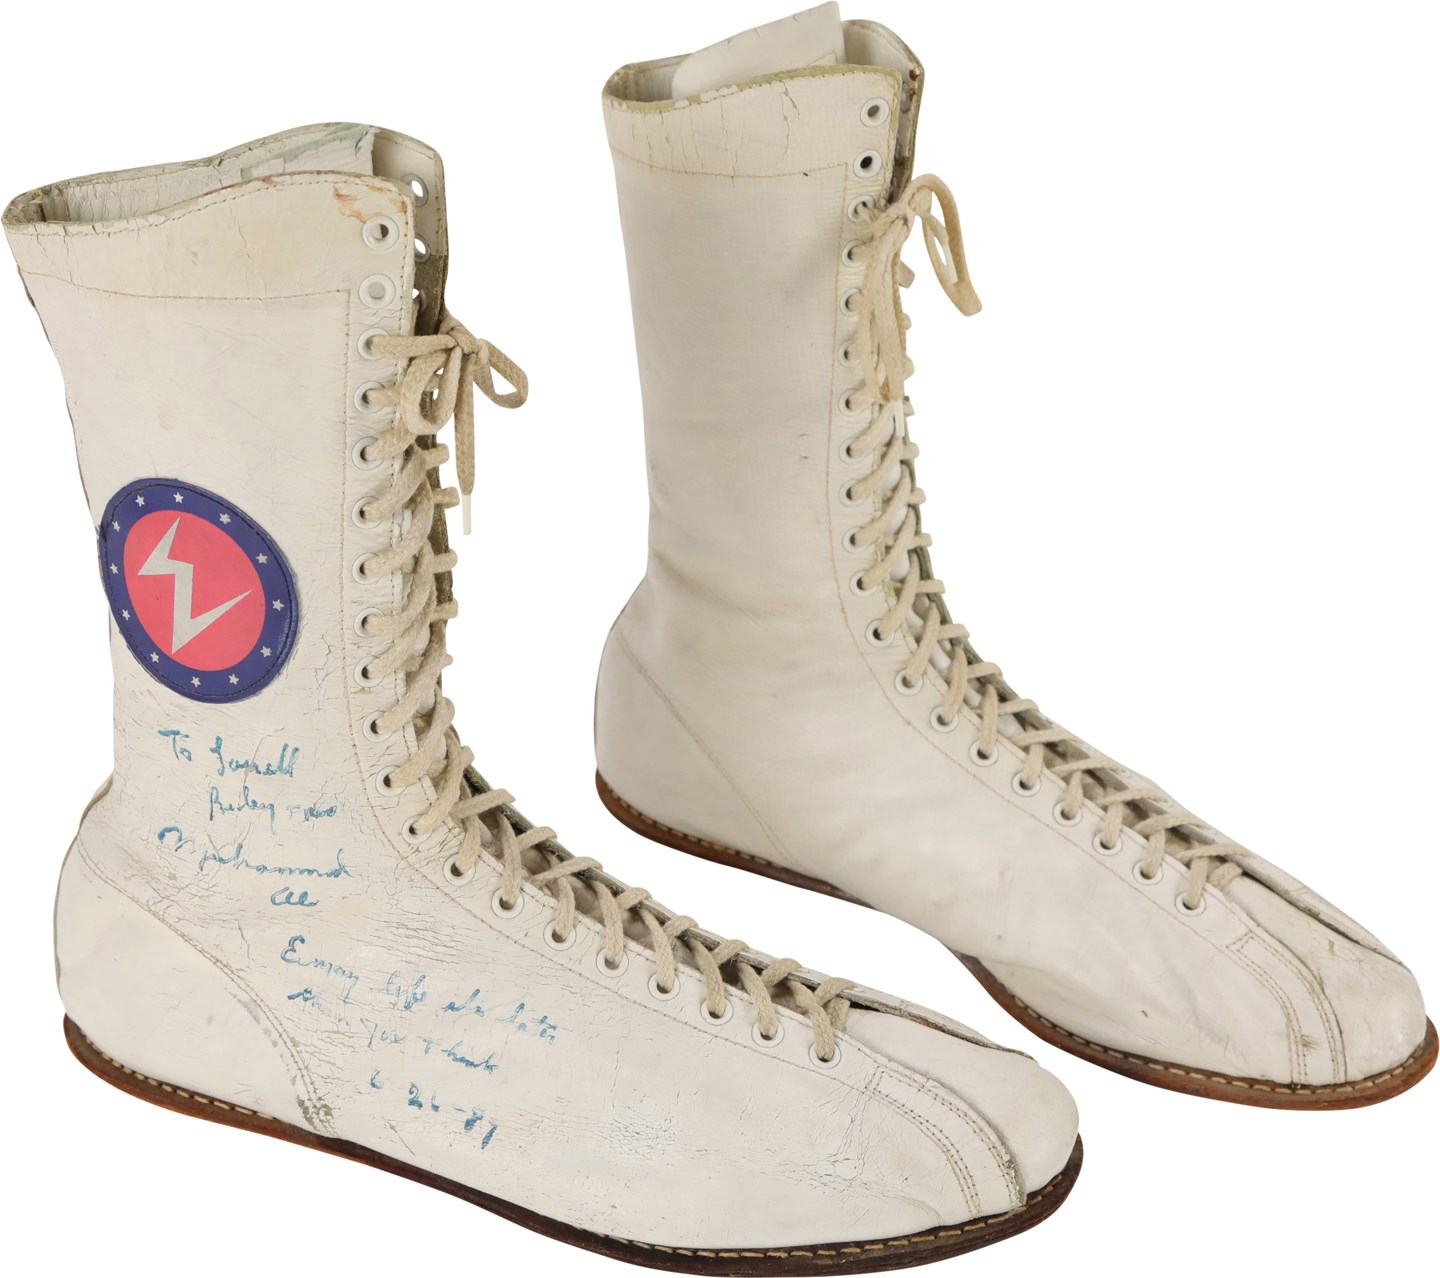 - 1970s Muhammad Ali Worn and Signed Everlast Boxing Shoes (Gifted to Personal Photographer, Lowell Riley)